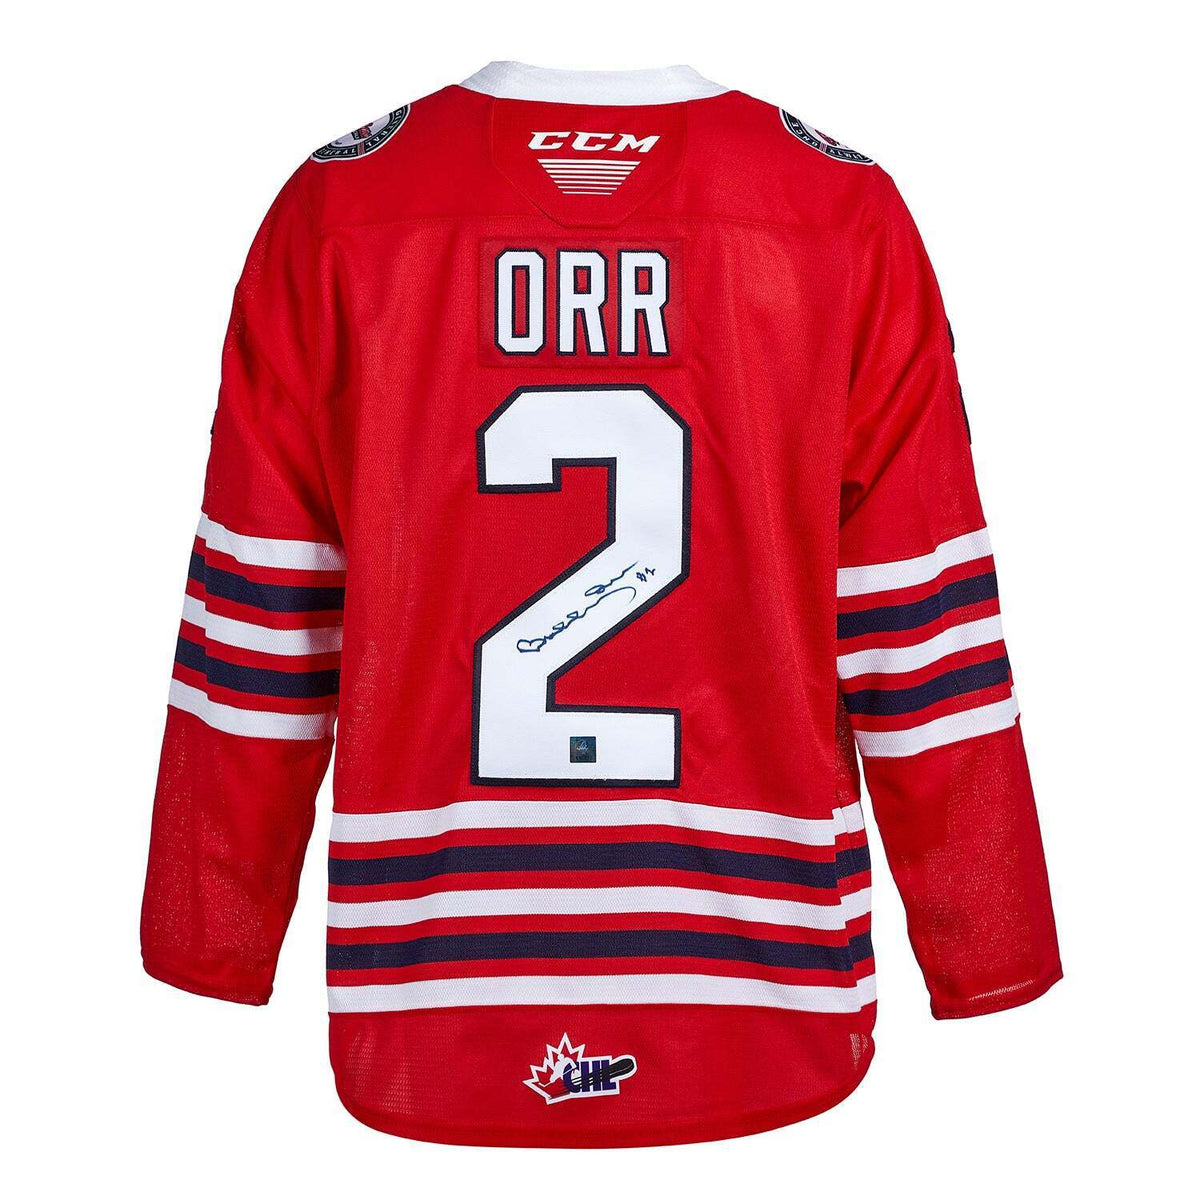 Bobby Orr Autographed Oshawa Generals CHL CCM Jersey – CollectibleXchange